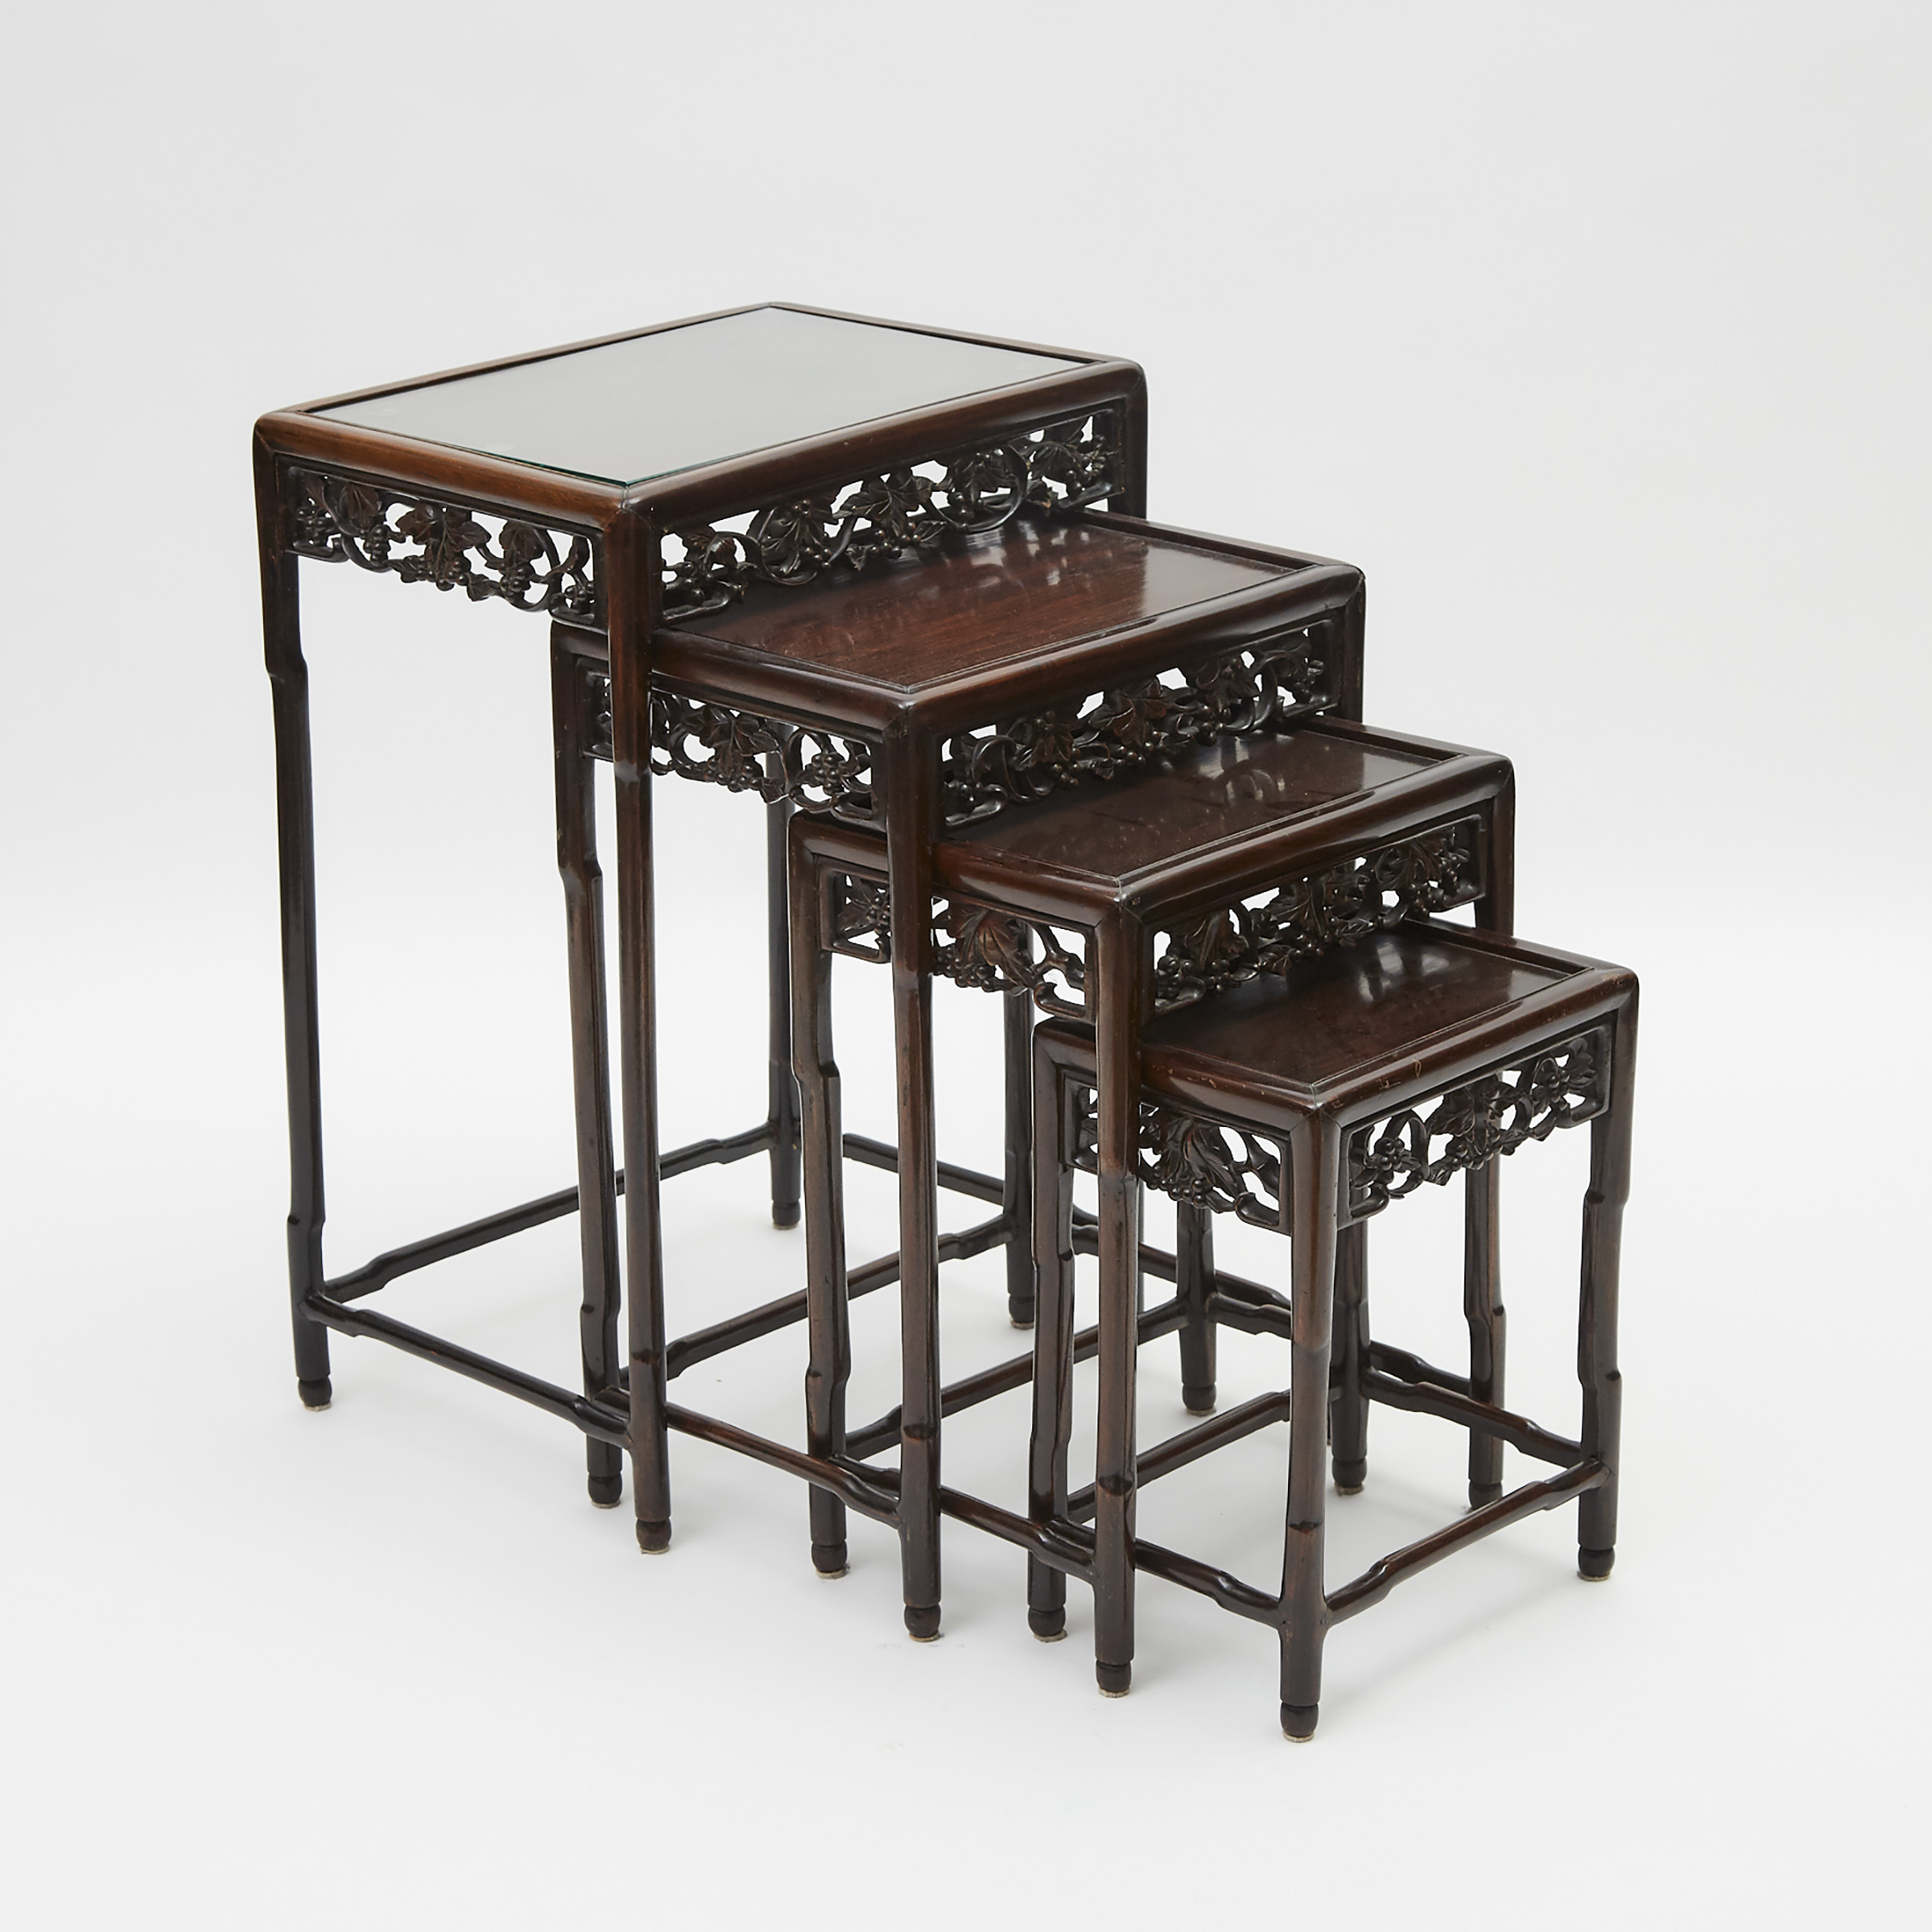 A Set of Four Chinese Rosewood Nesting Tables, Late Qing/Early Republican Period